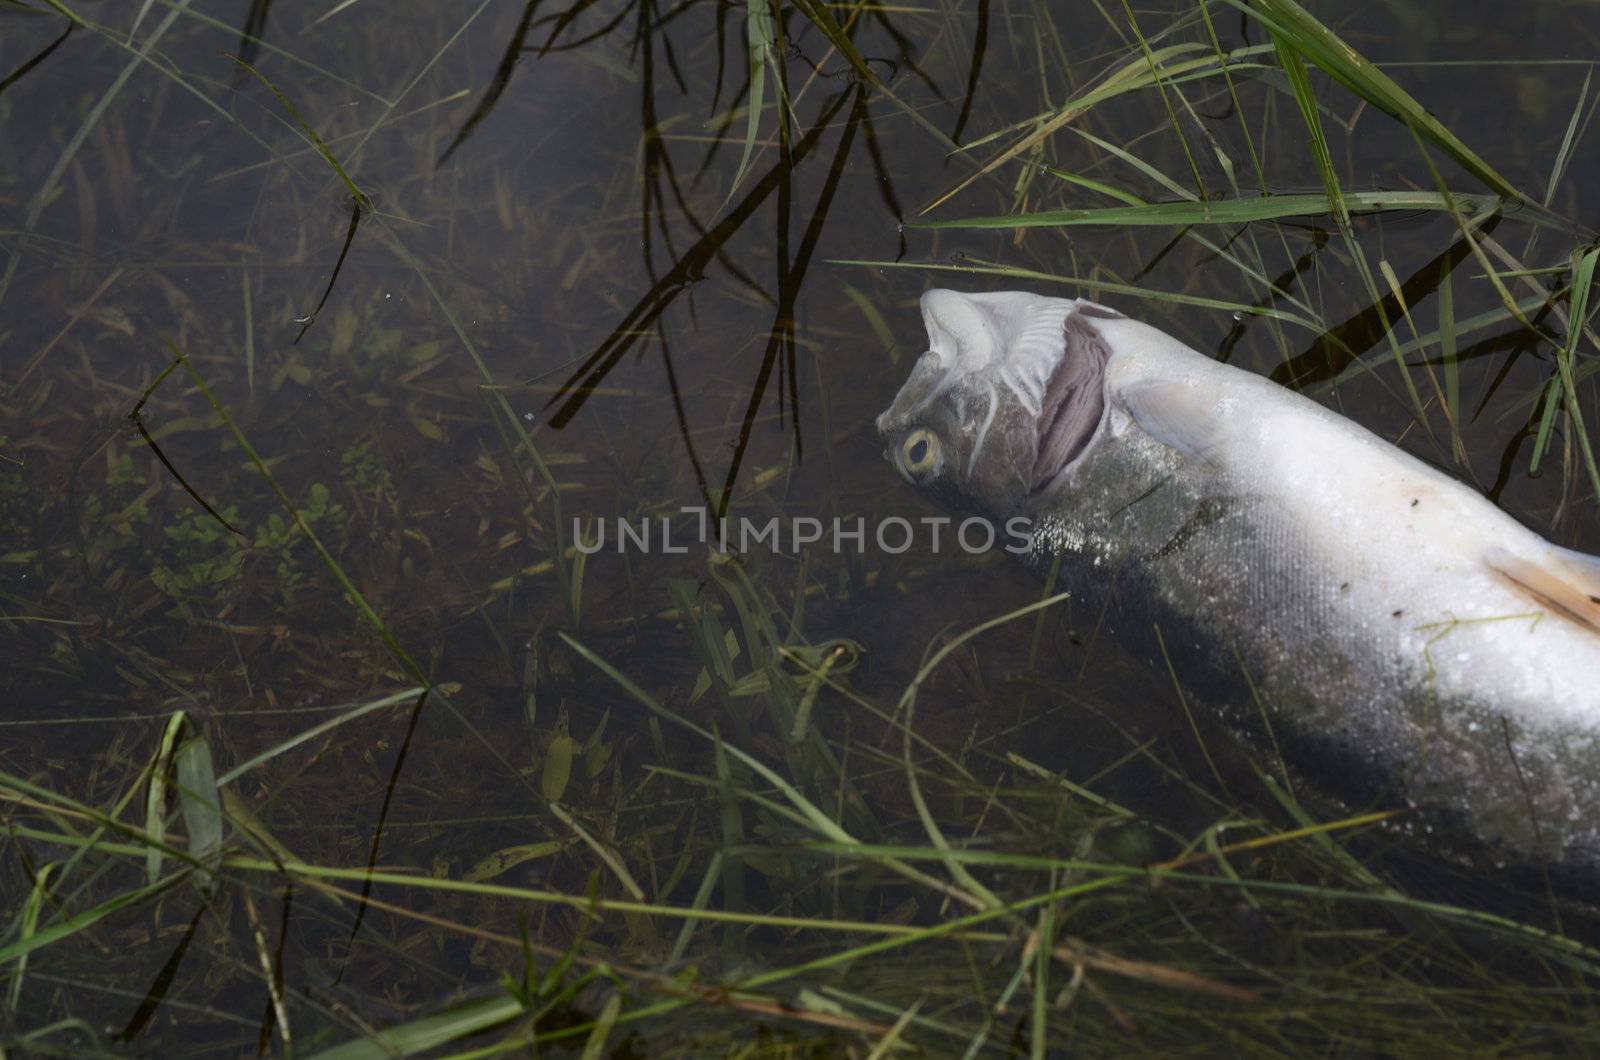 Toxic dead fish in polluted water by alistaircotton